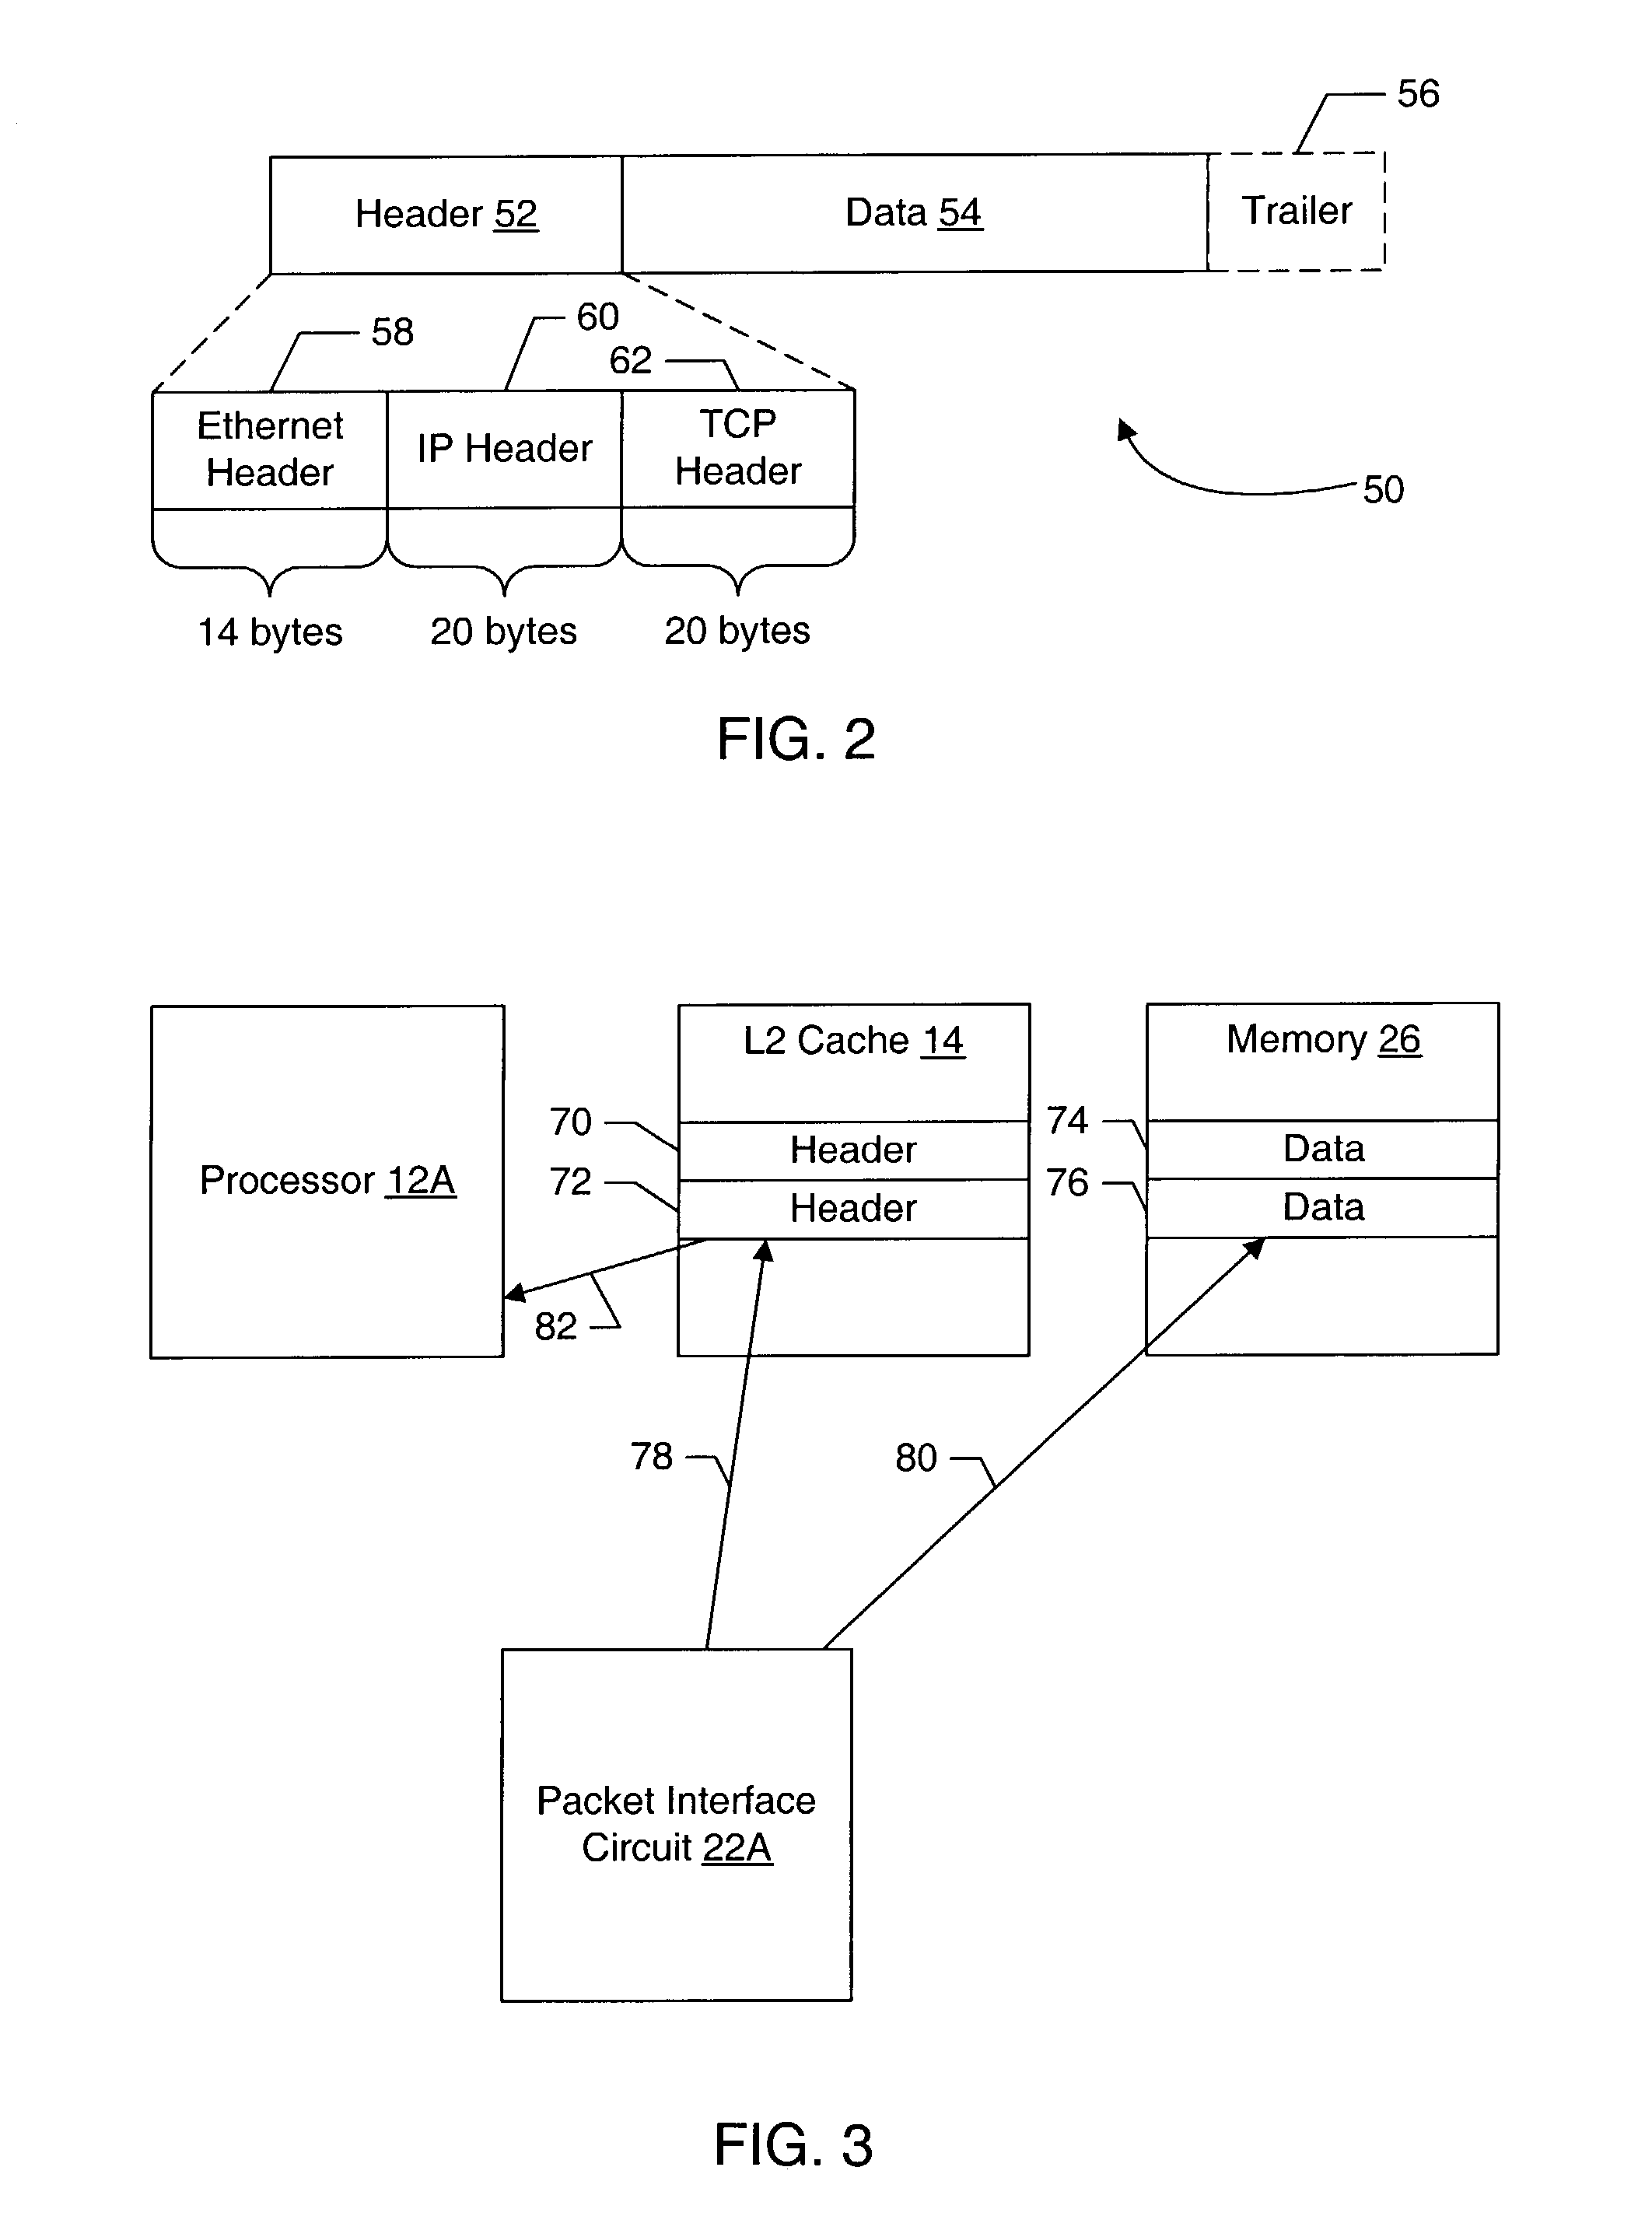 System on a chip for caching of data packets based on a cache miss/hit and a state of a control signal